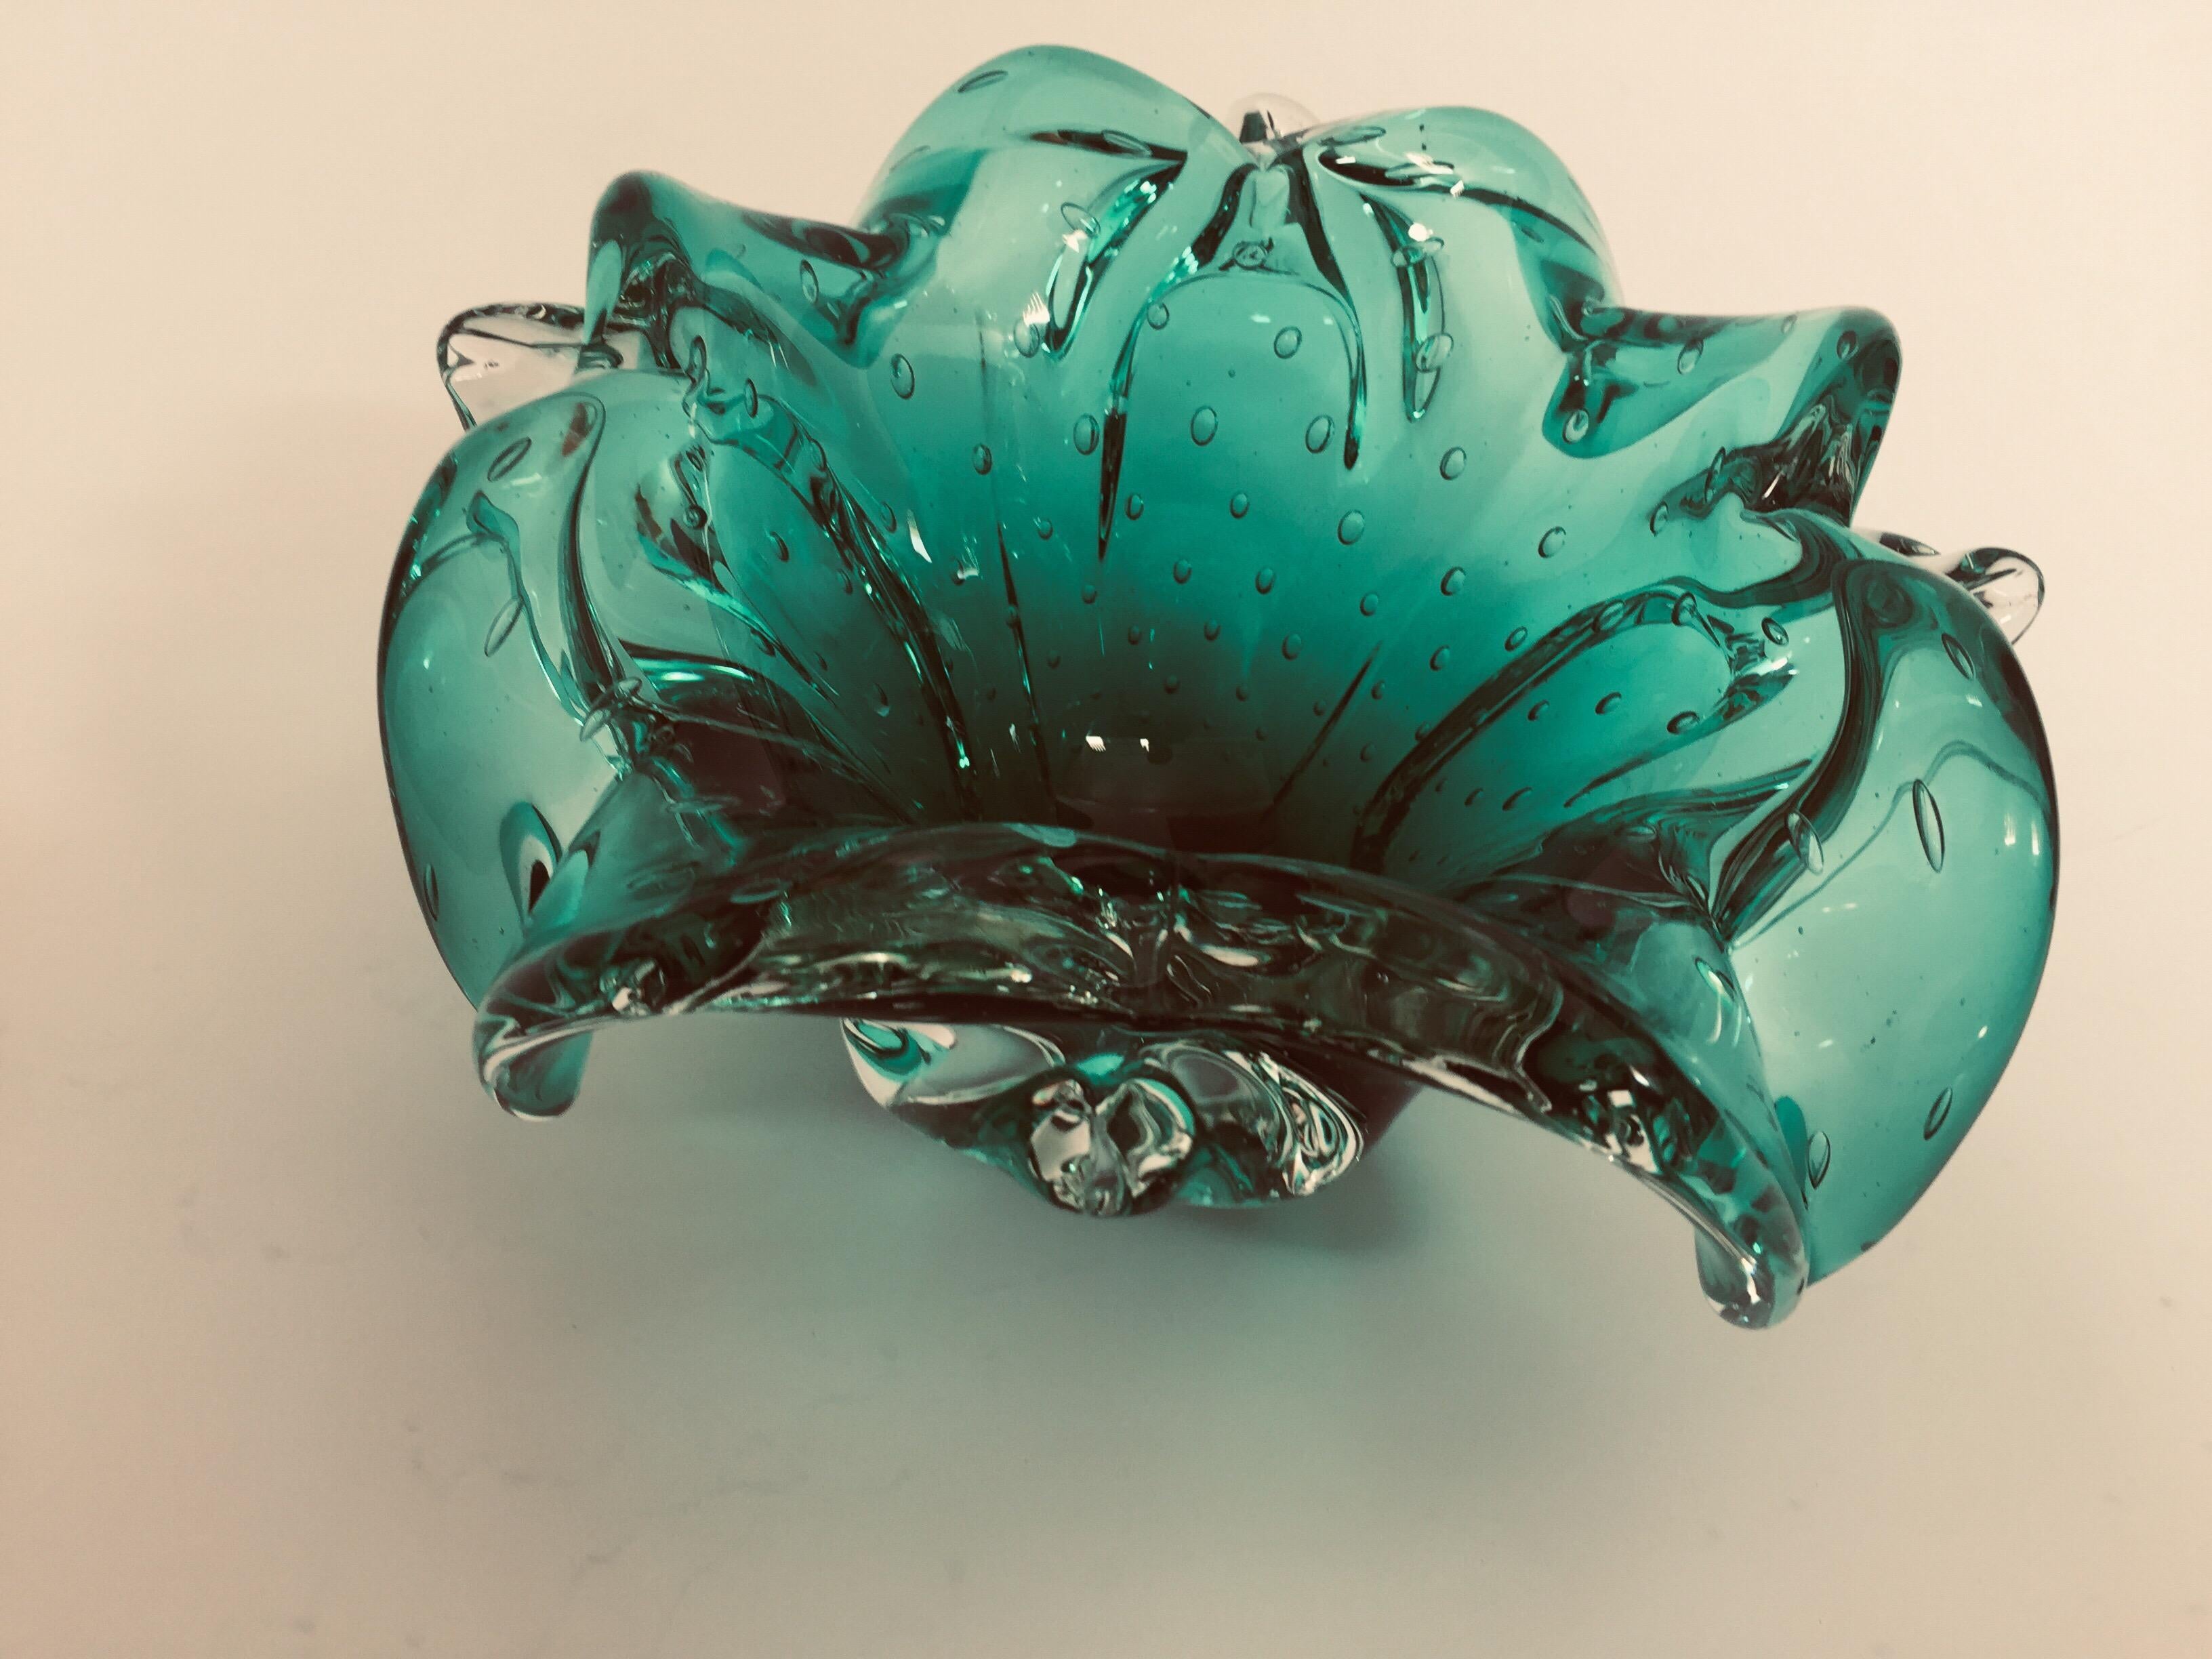 Gorgeous green Venetian hand blown glass flower shaped change bowl or ashtray.
Sculptural organic open glass flower form in emerald green and beautiful gold flecks decoration in aventurine technique.
Use it as an ashtray, vide poche or for